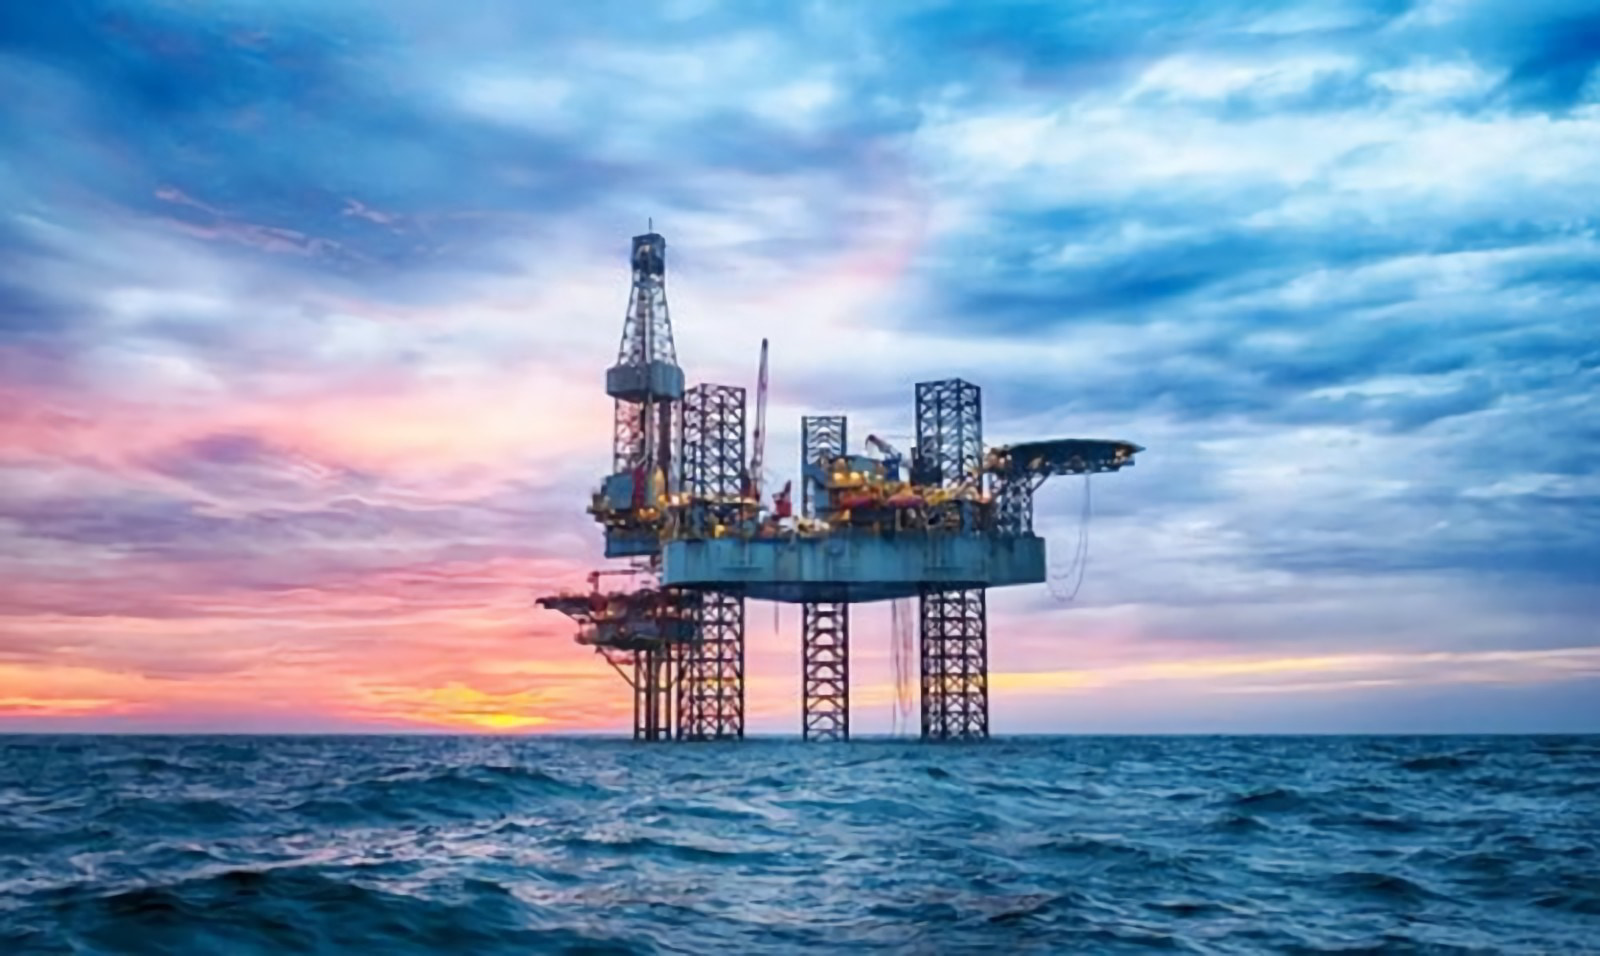 UK firm’s North Sea discovery forecasted to rake in $545 million in revenue over life of field